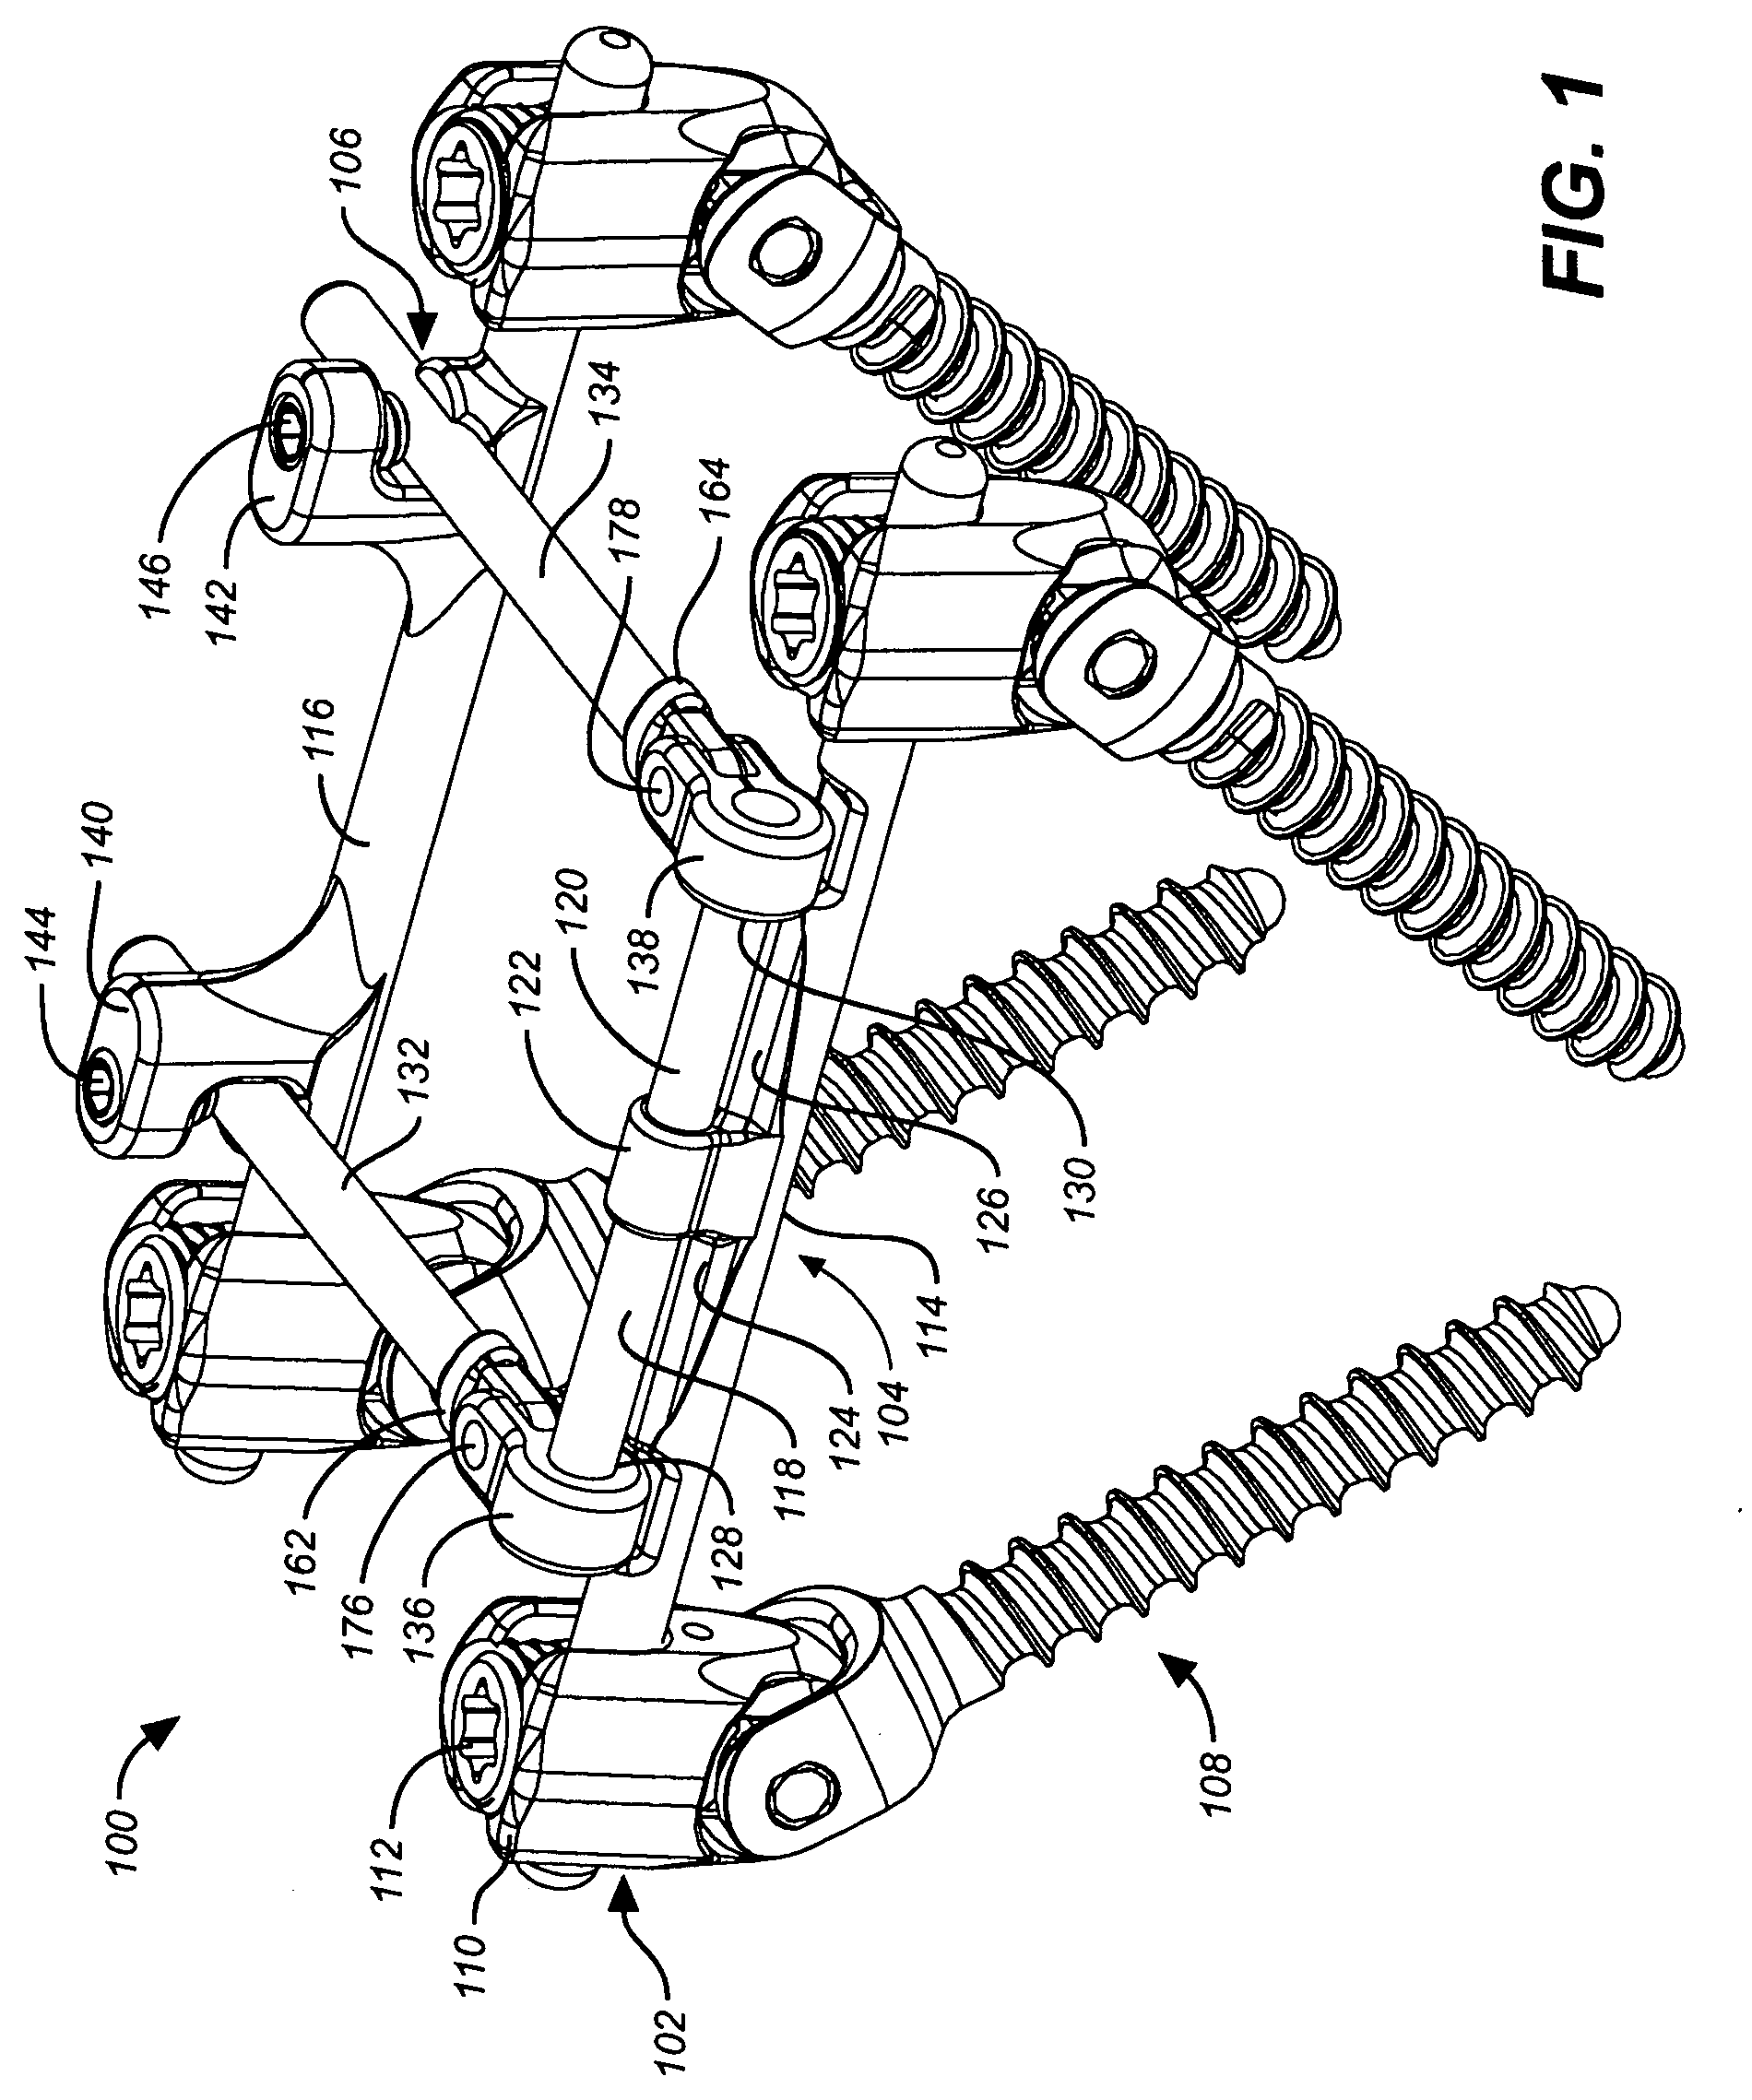 Deflection rod system with a deflection contouring shield for a spine implant and method